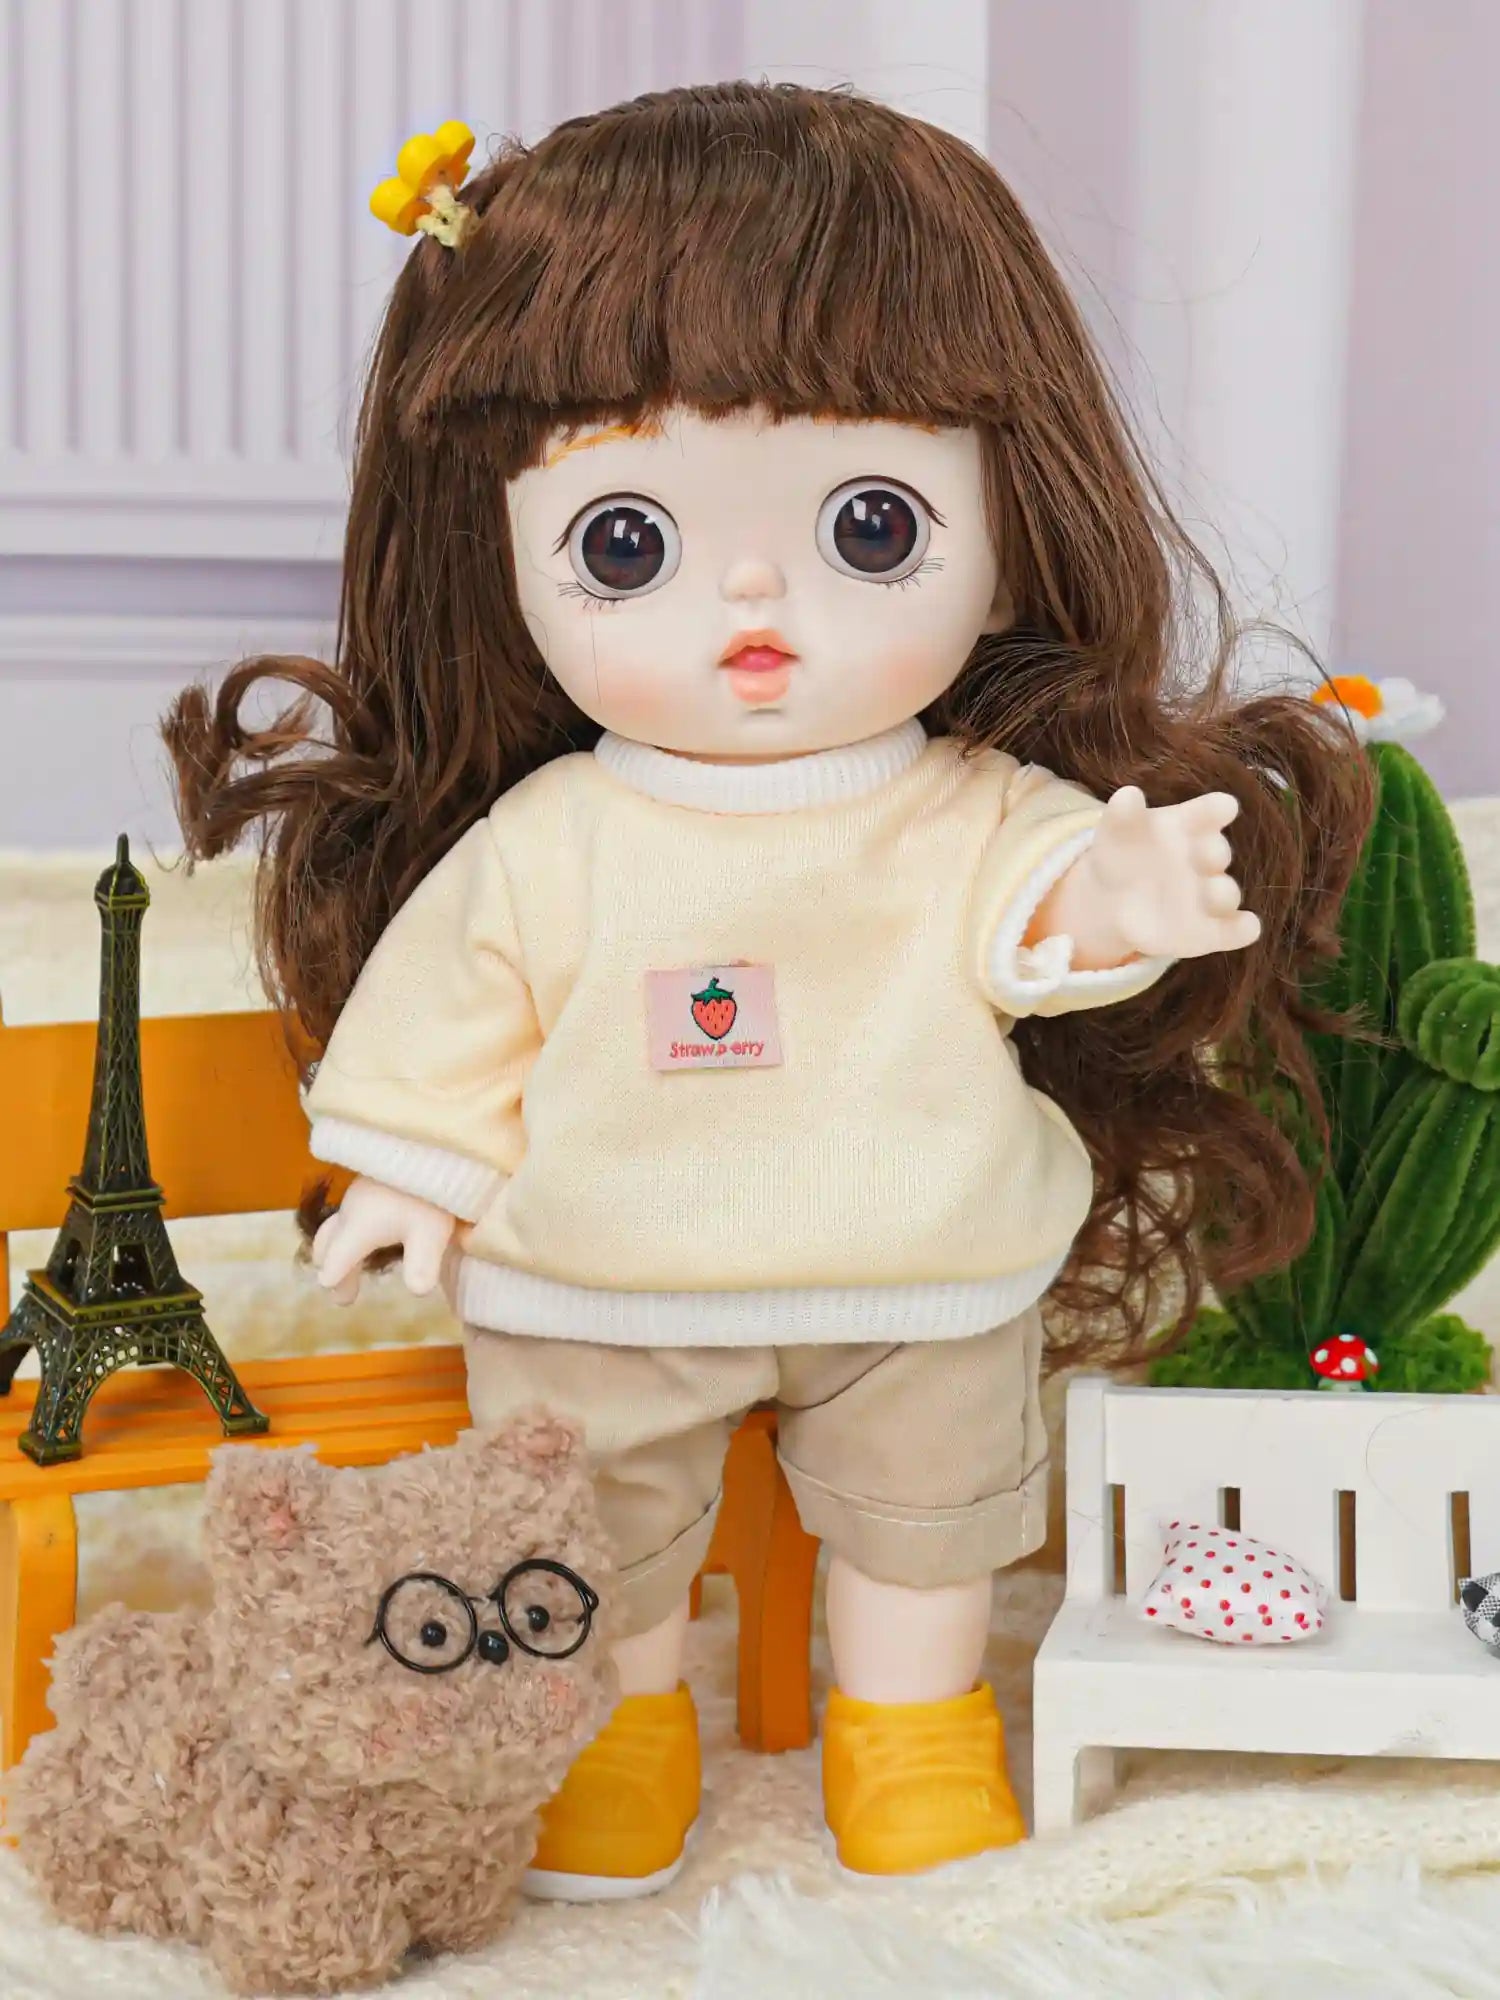 A doll with expressive brown eyes and lush hair, wearing a cream sweater and beige pants, poses with a cactus.